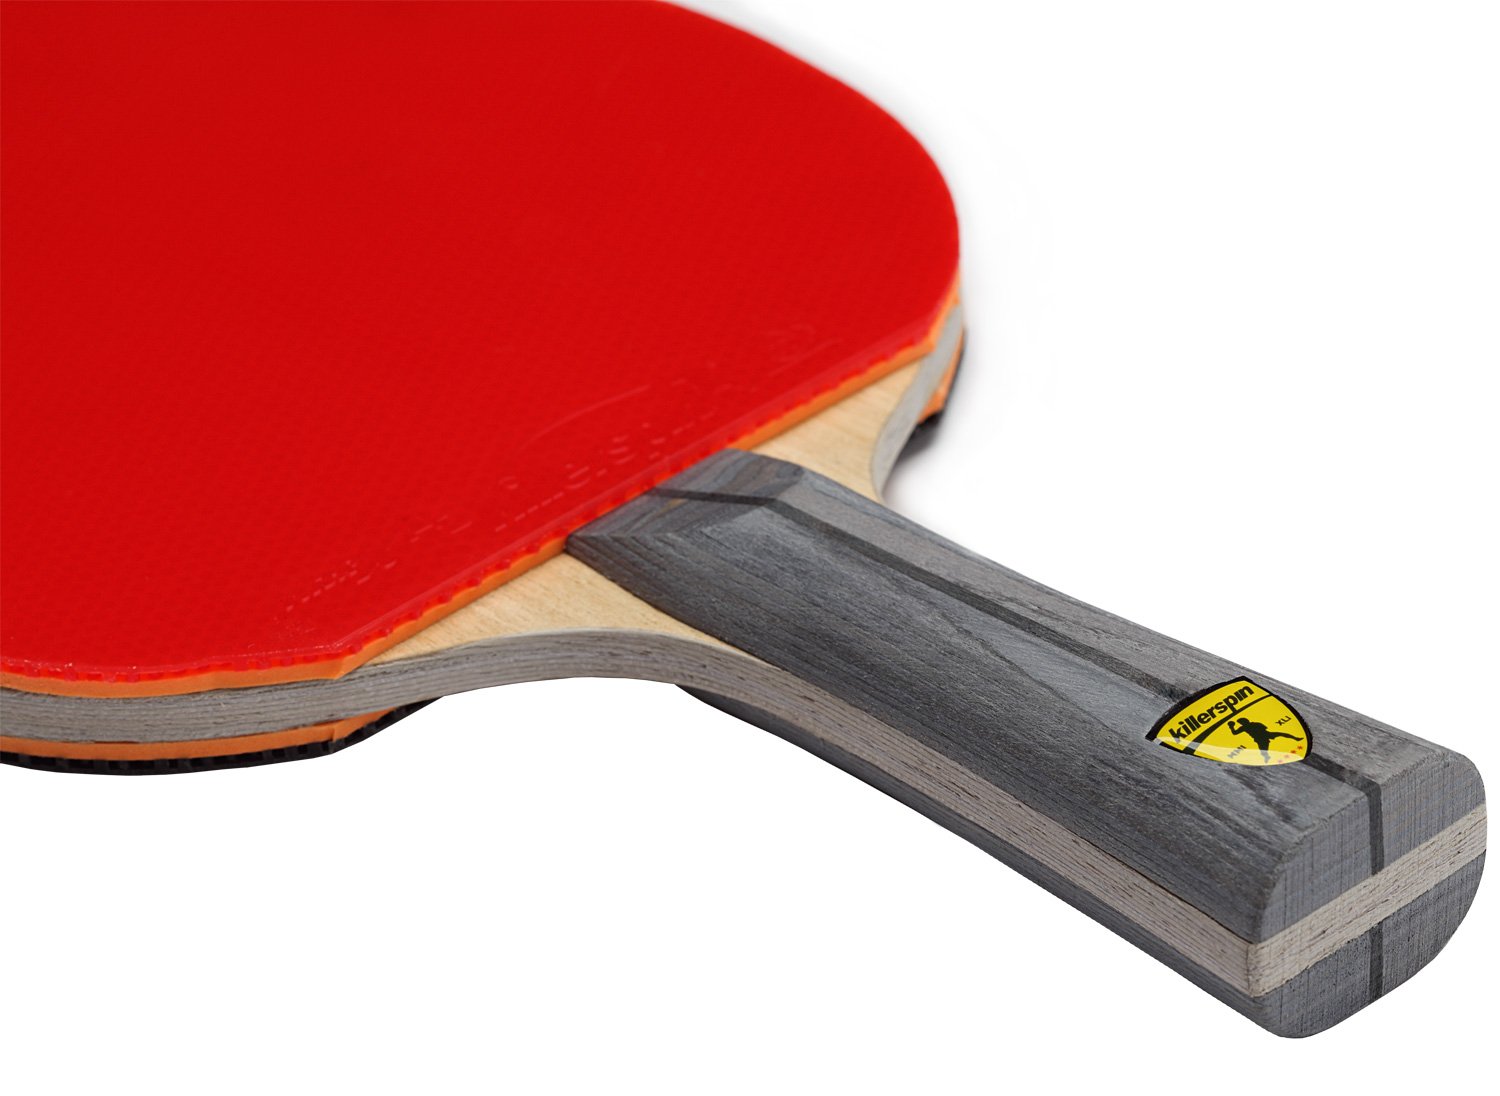 Killerspin JET600 SPIN N1 Intermediate Table Tennis Paddle, Red - image 4 of 4